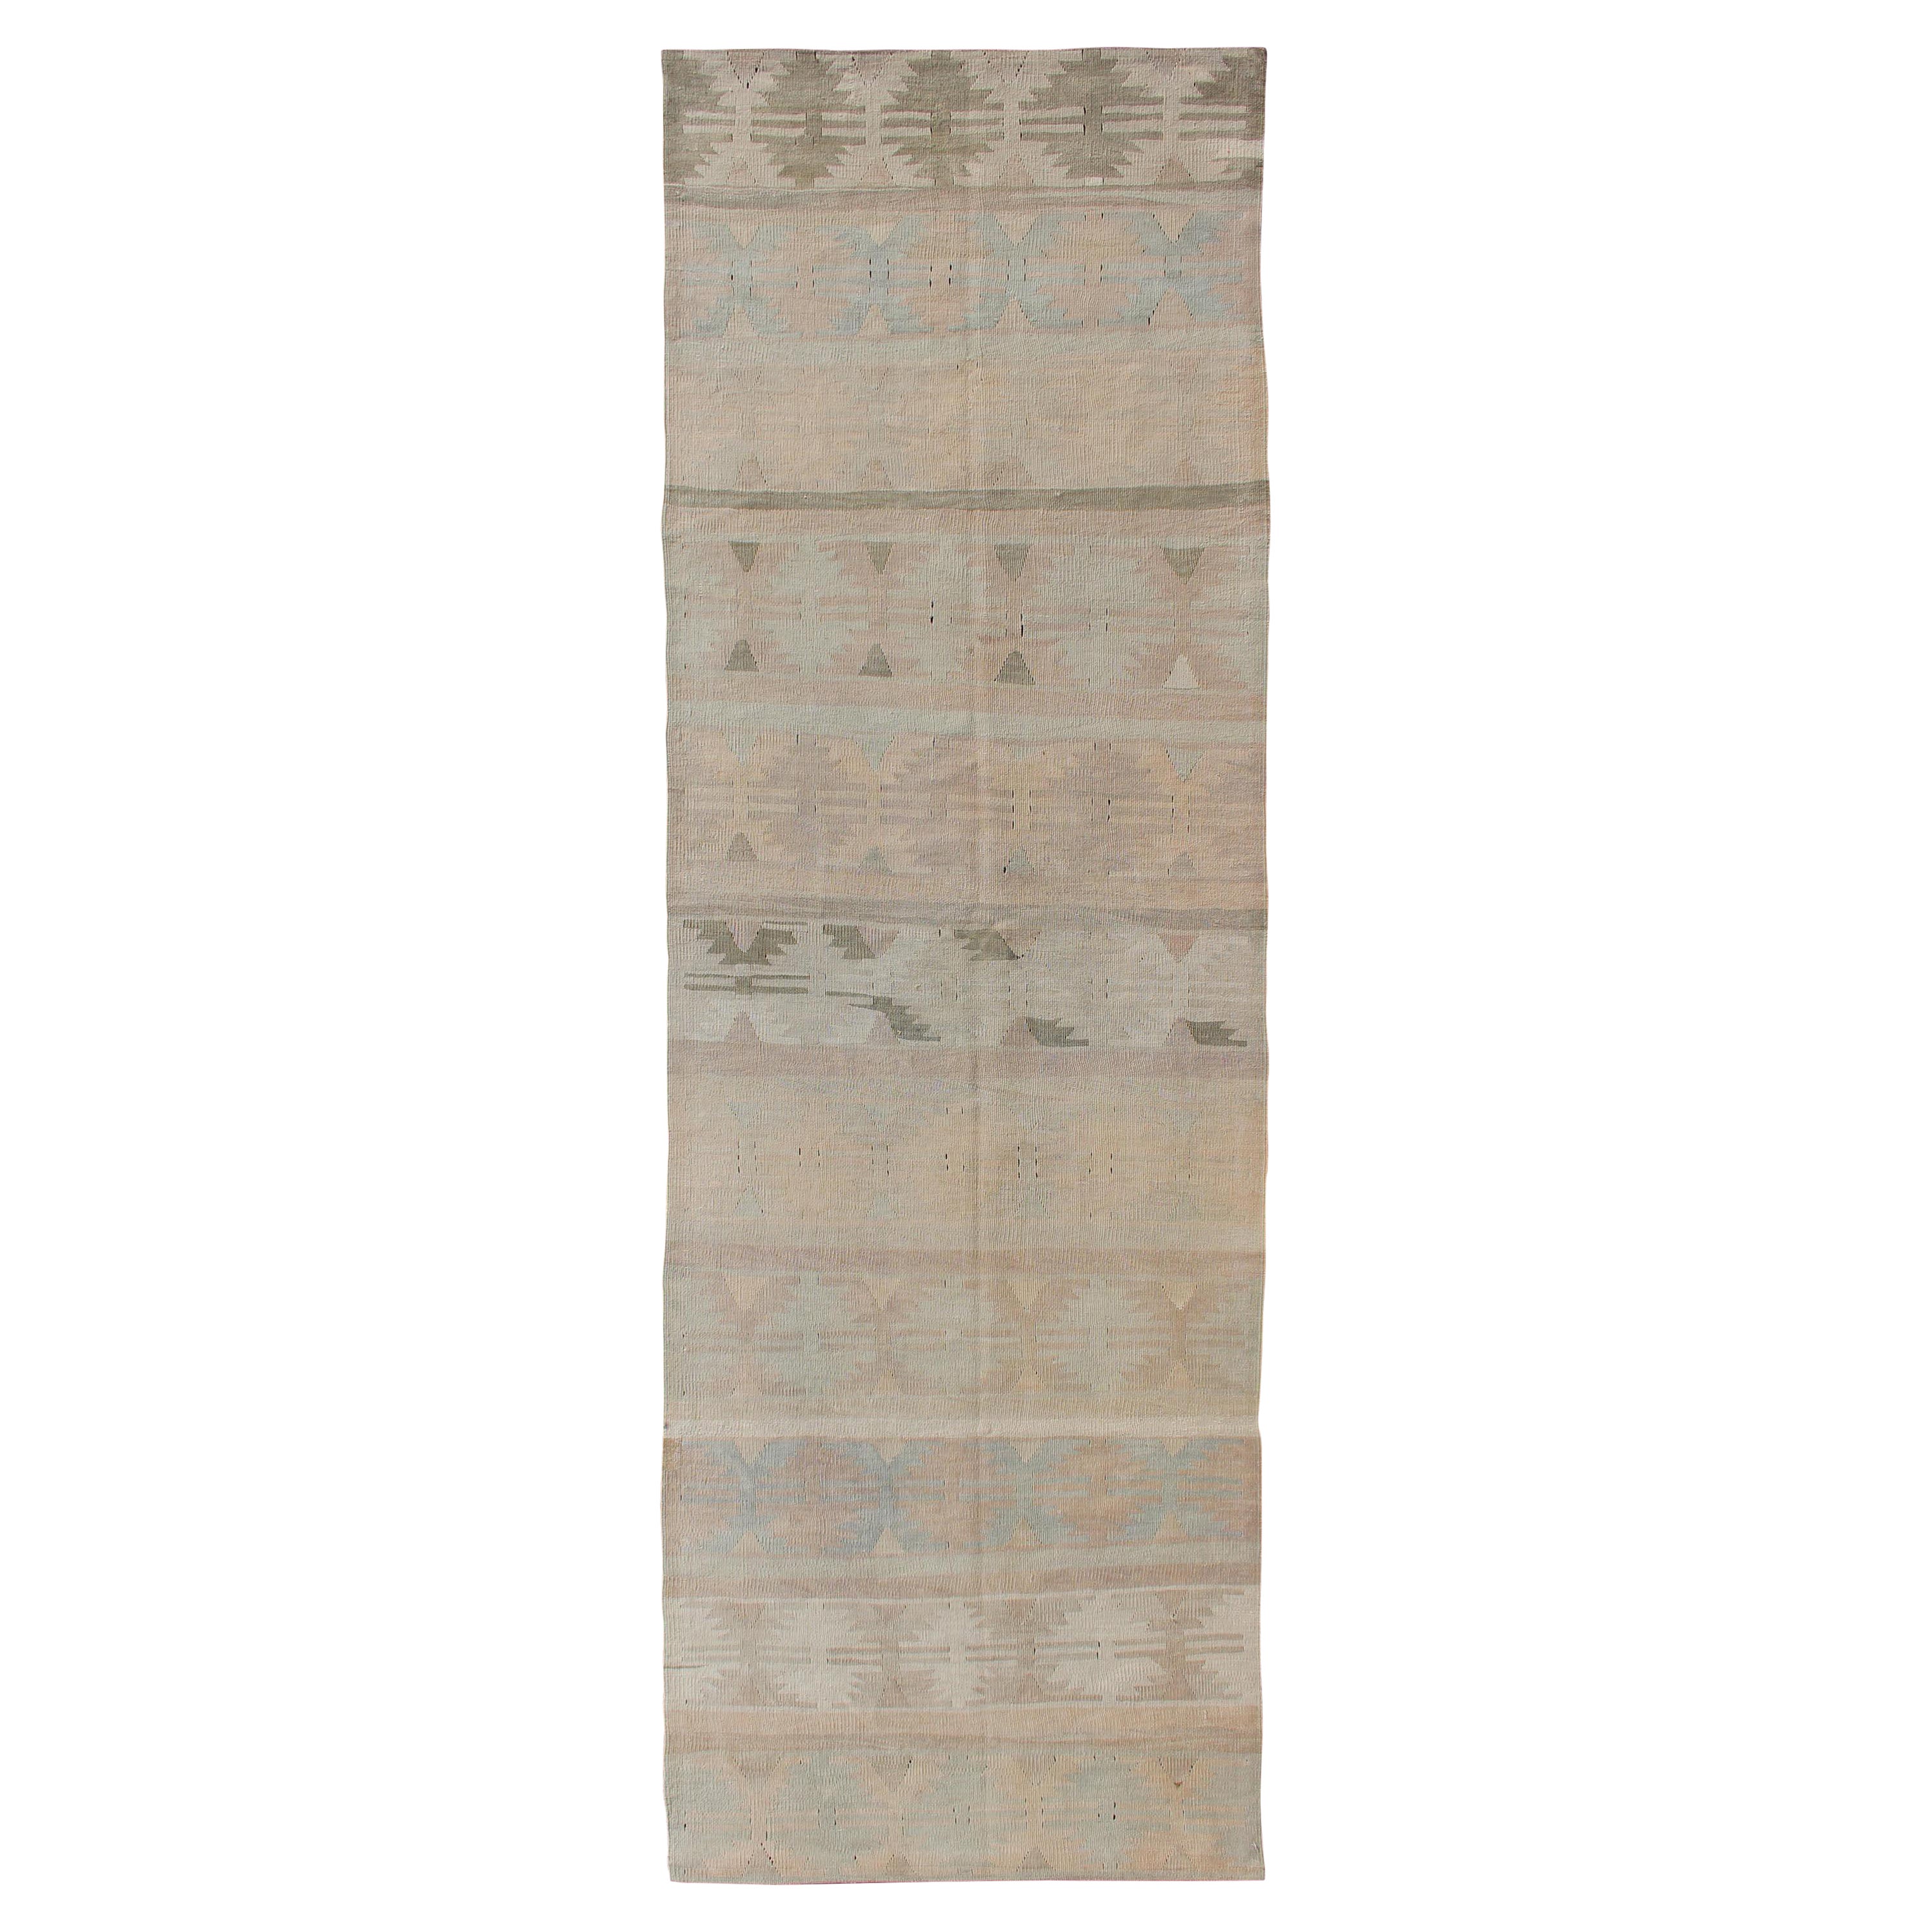 Vintage Turkish Kilim Runner with a Stripe Design in Muted Earthy Color Tones For Sale